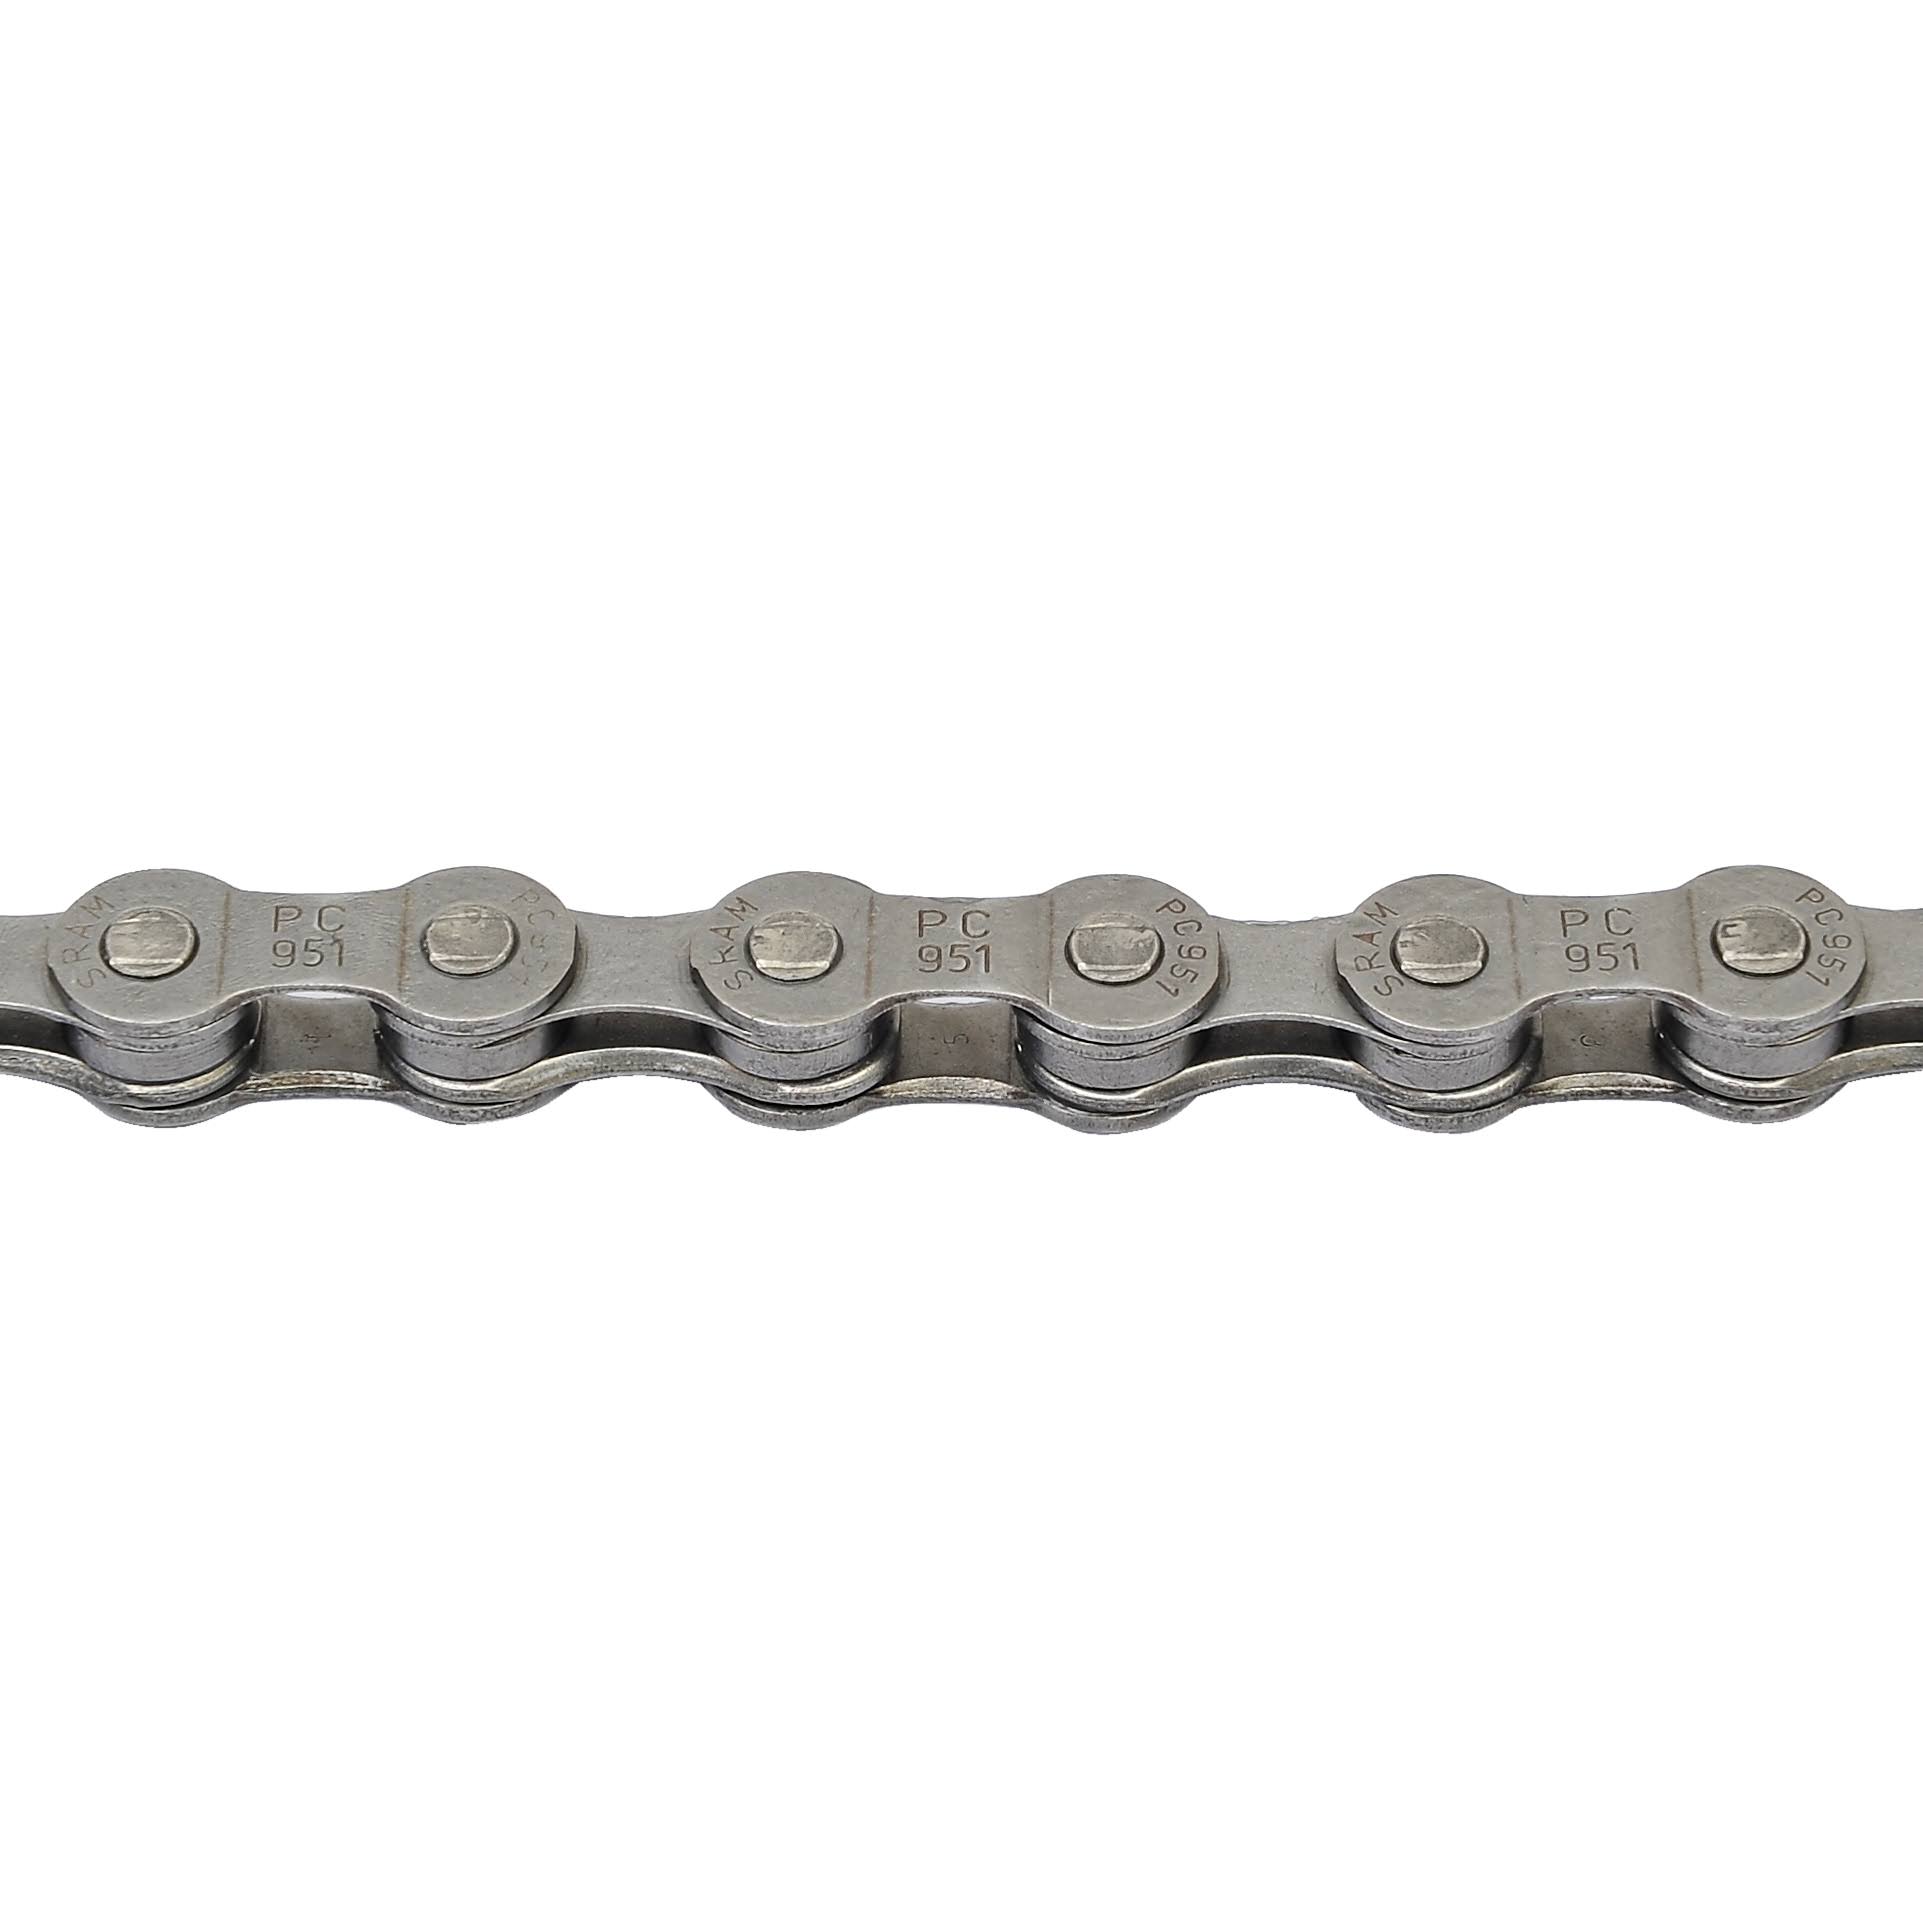 SRAM PC 951 P-Link Bicycle Chain - 9-Speed